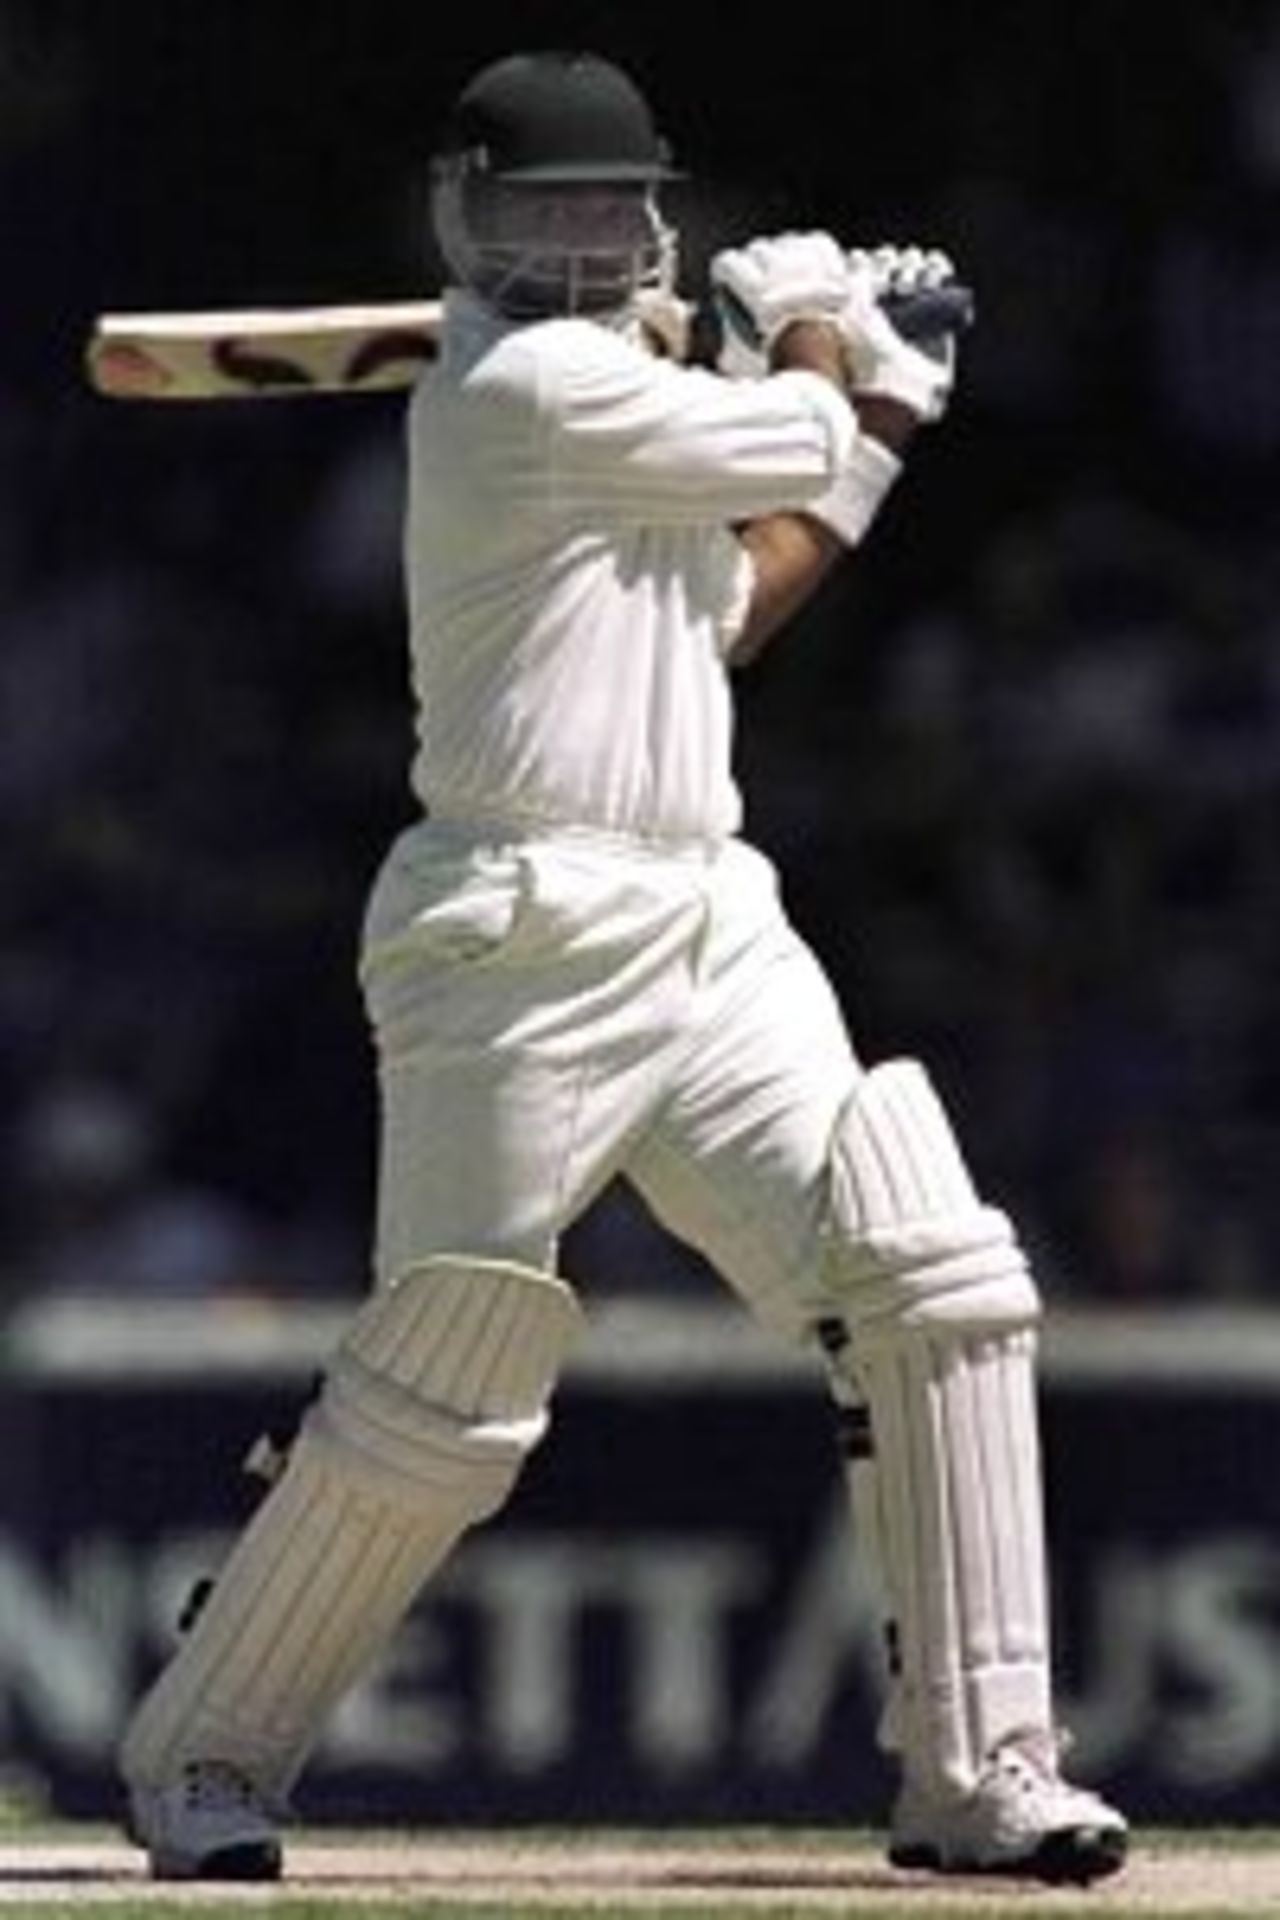 20 Nov 1999: Pakistan batsman Ijaz Ahmed smashes a ball away to the boundary on his way to a score of eighty two, during day three of the Second test between Australia and Pakistan at Bellerive Oval, Hobart, Australia.